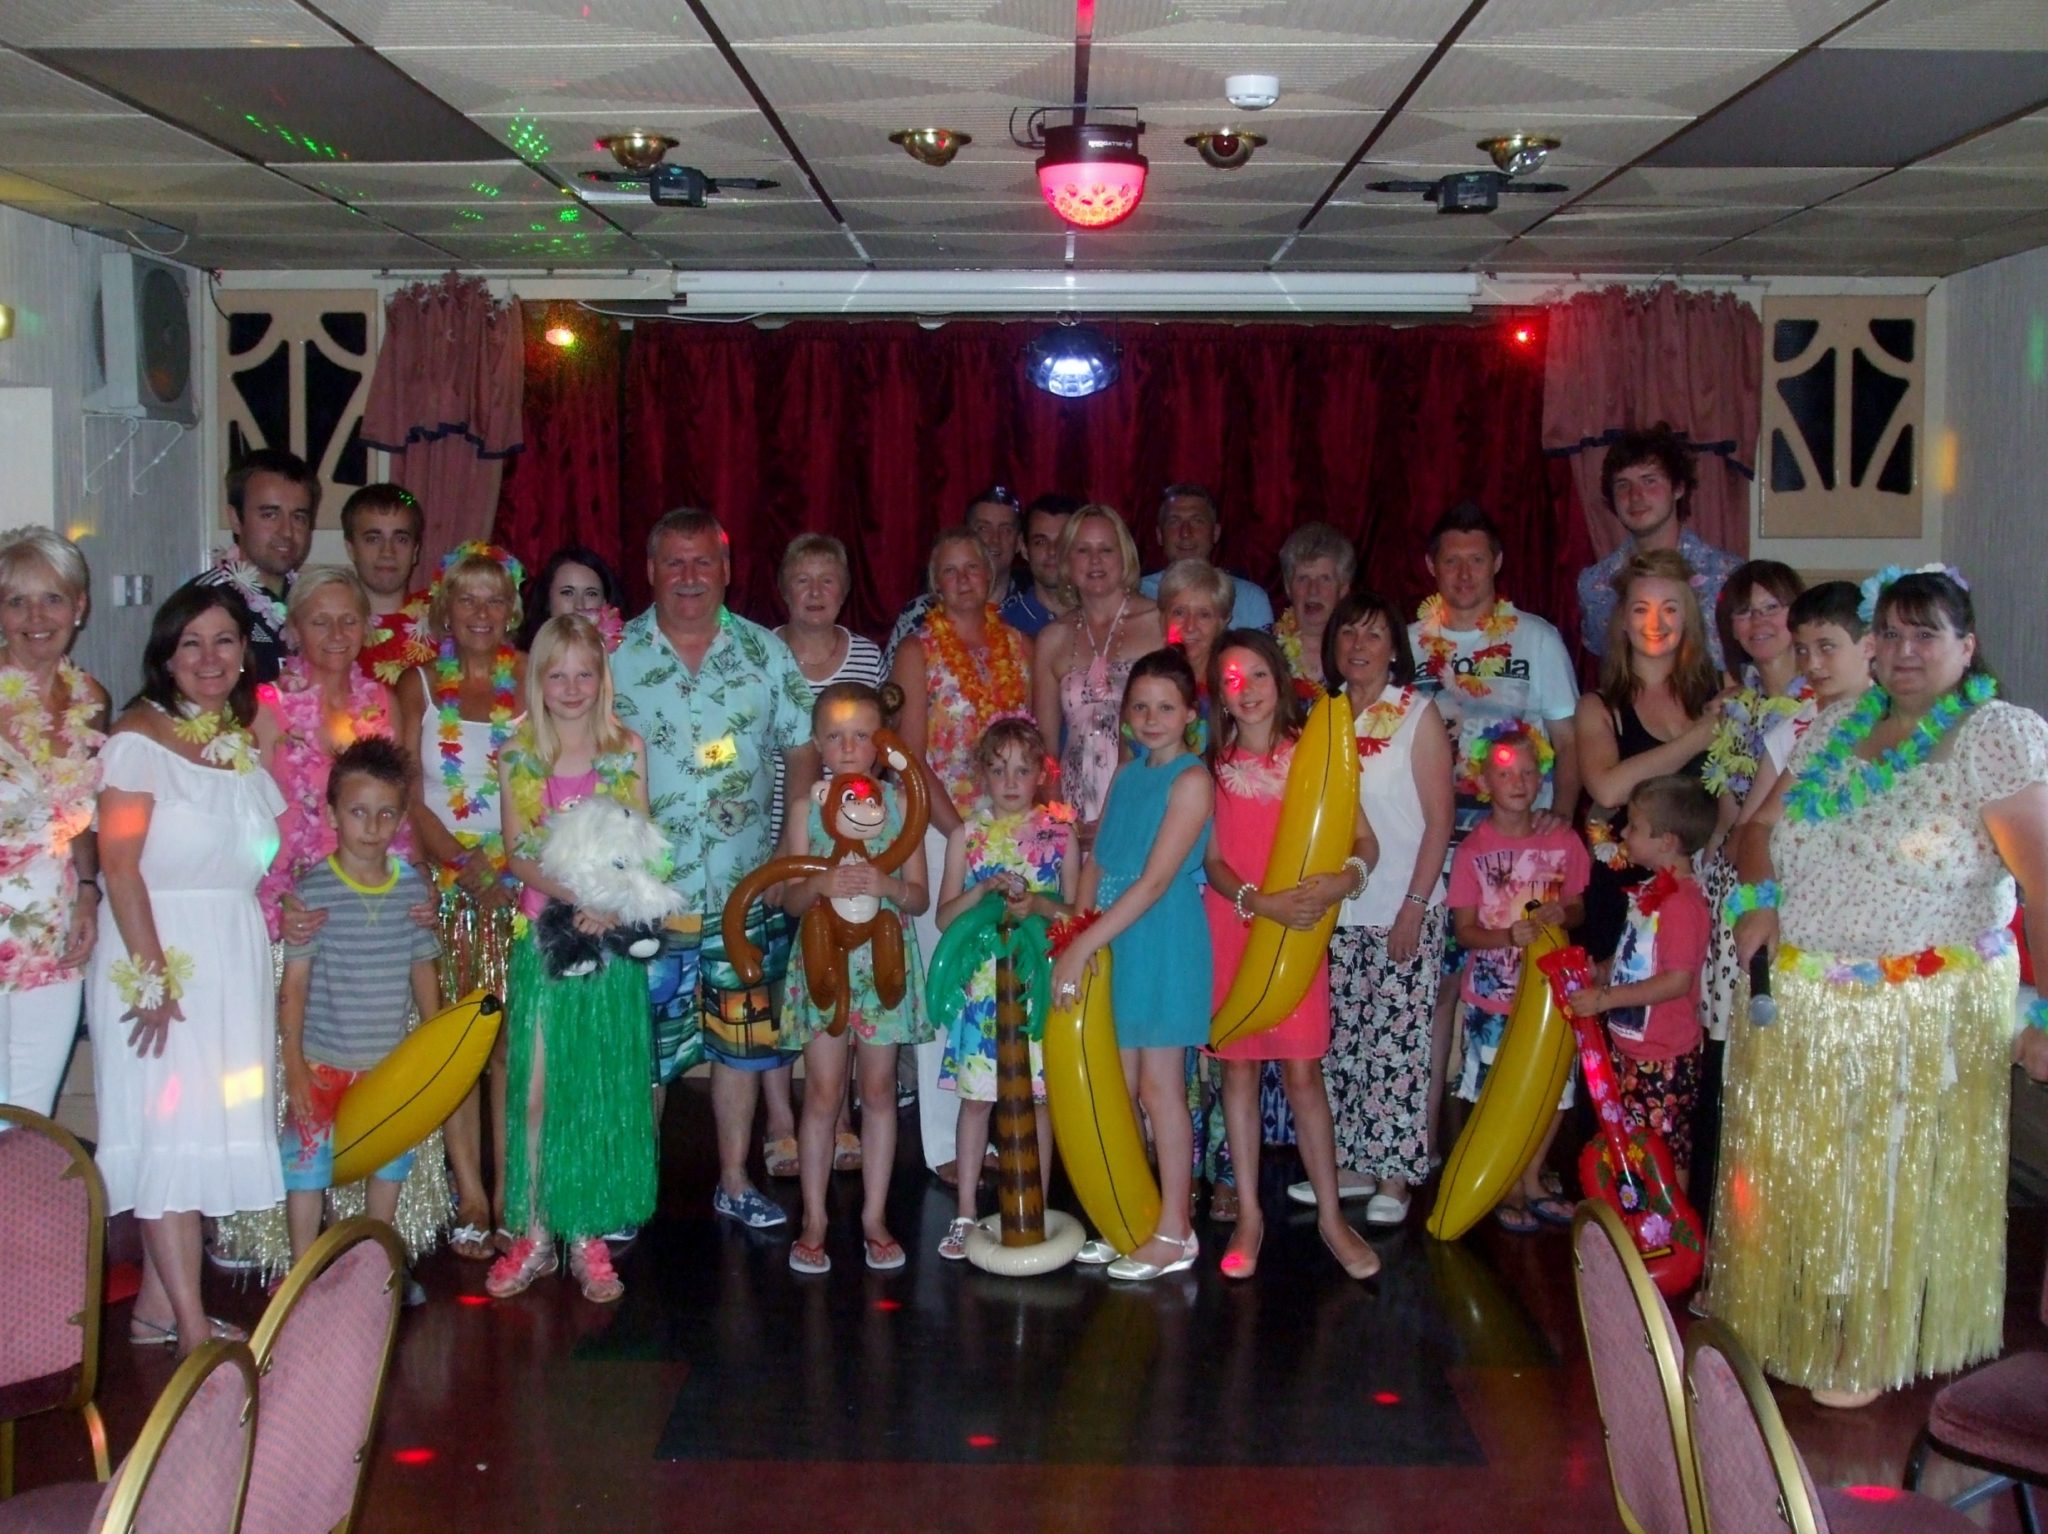 The Hawaiian night fundraiser organised by staff at Cwmbran Wilko store